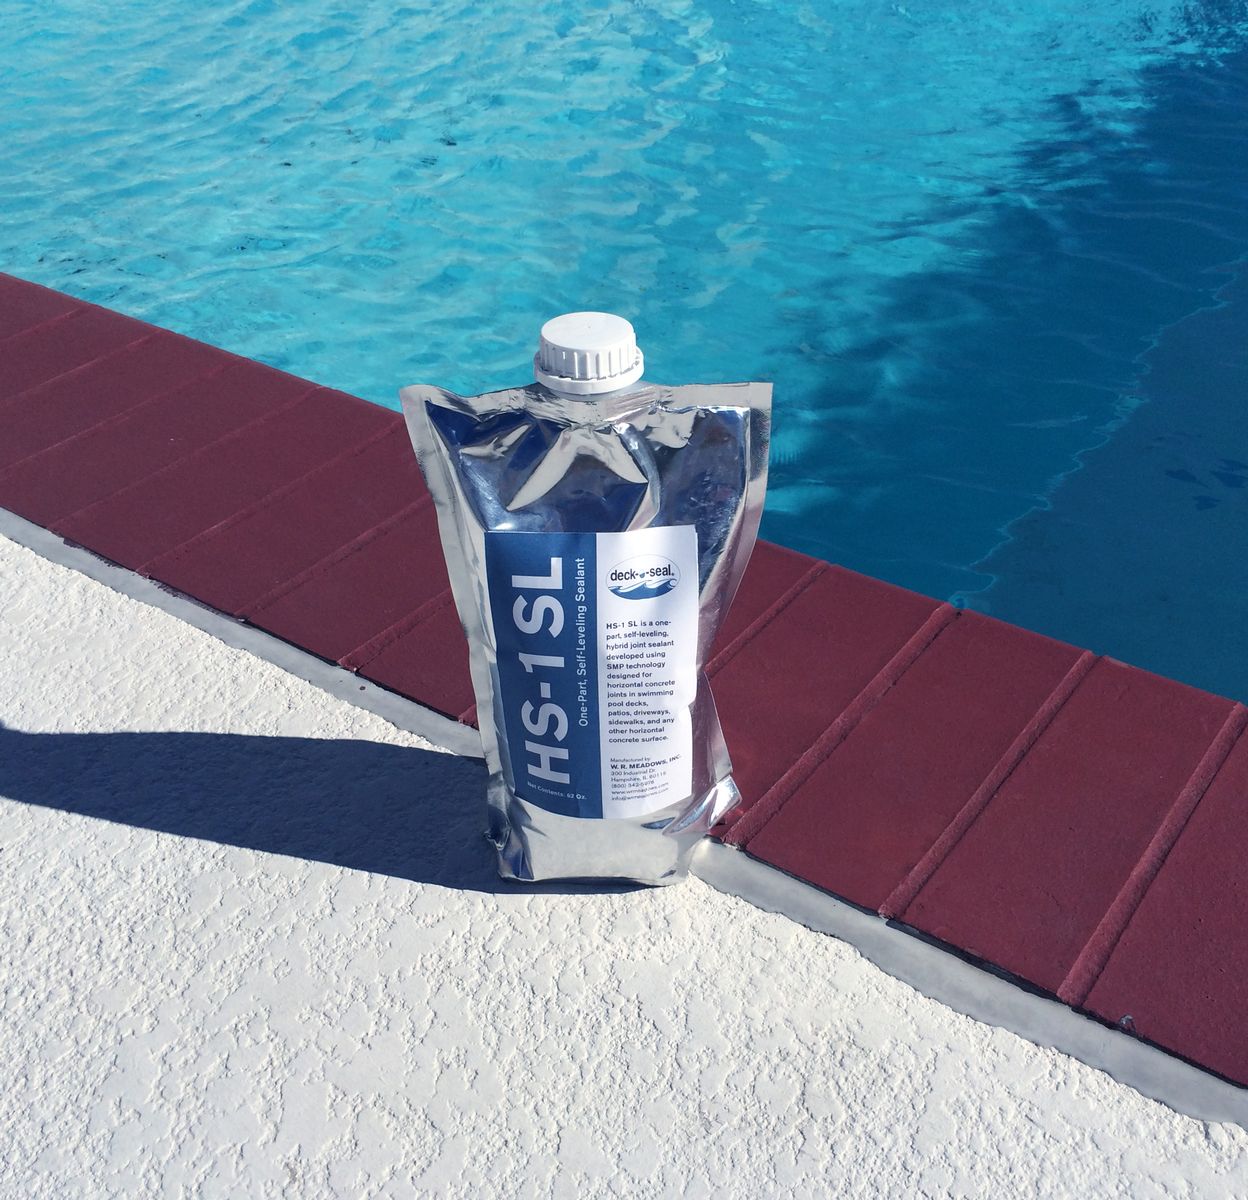 Deck-O-Seal, a division of W. R. Meadows offering pool deck products, is now offering HS-1 SL, a one-part, self-leveling hybrid polymer sealant for various pool applications.